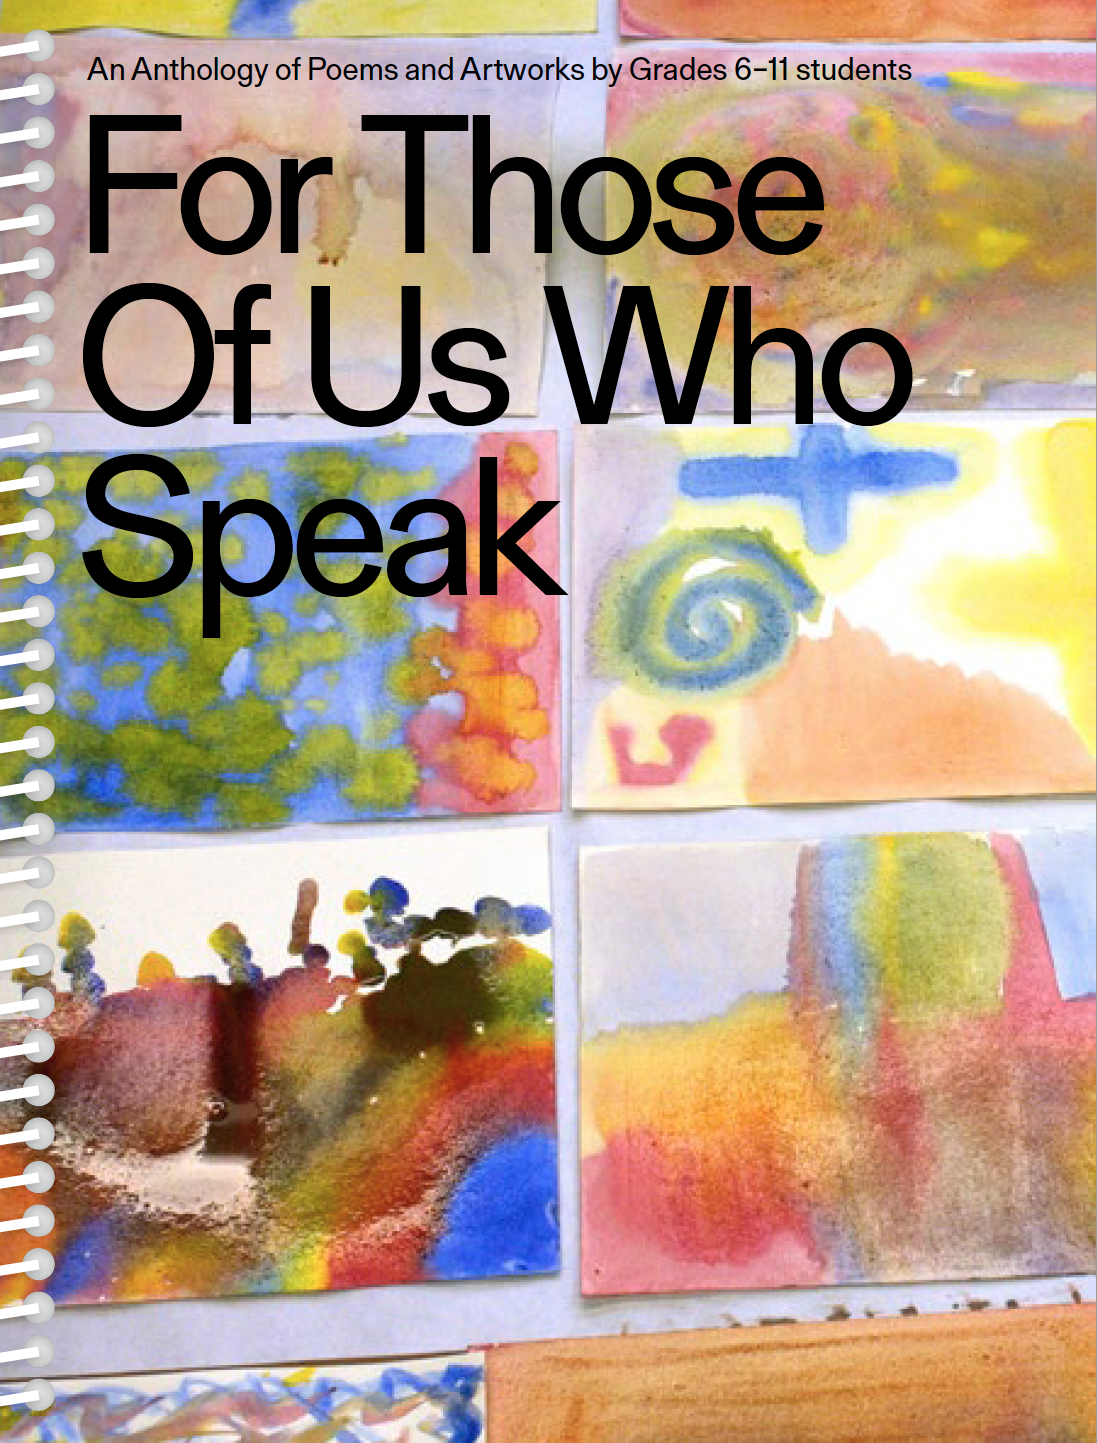 The cover of a ring-bound book, depicting several abstract, watercolor images in a two-column grid pattern. Black text states "An Anthology of Poems and Artworks by Grades 6-11 students - For Those Of Us Who Speak"